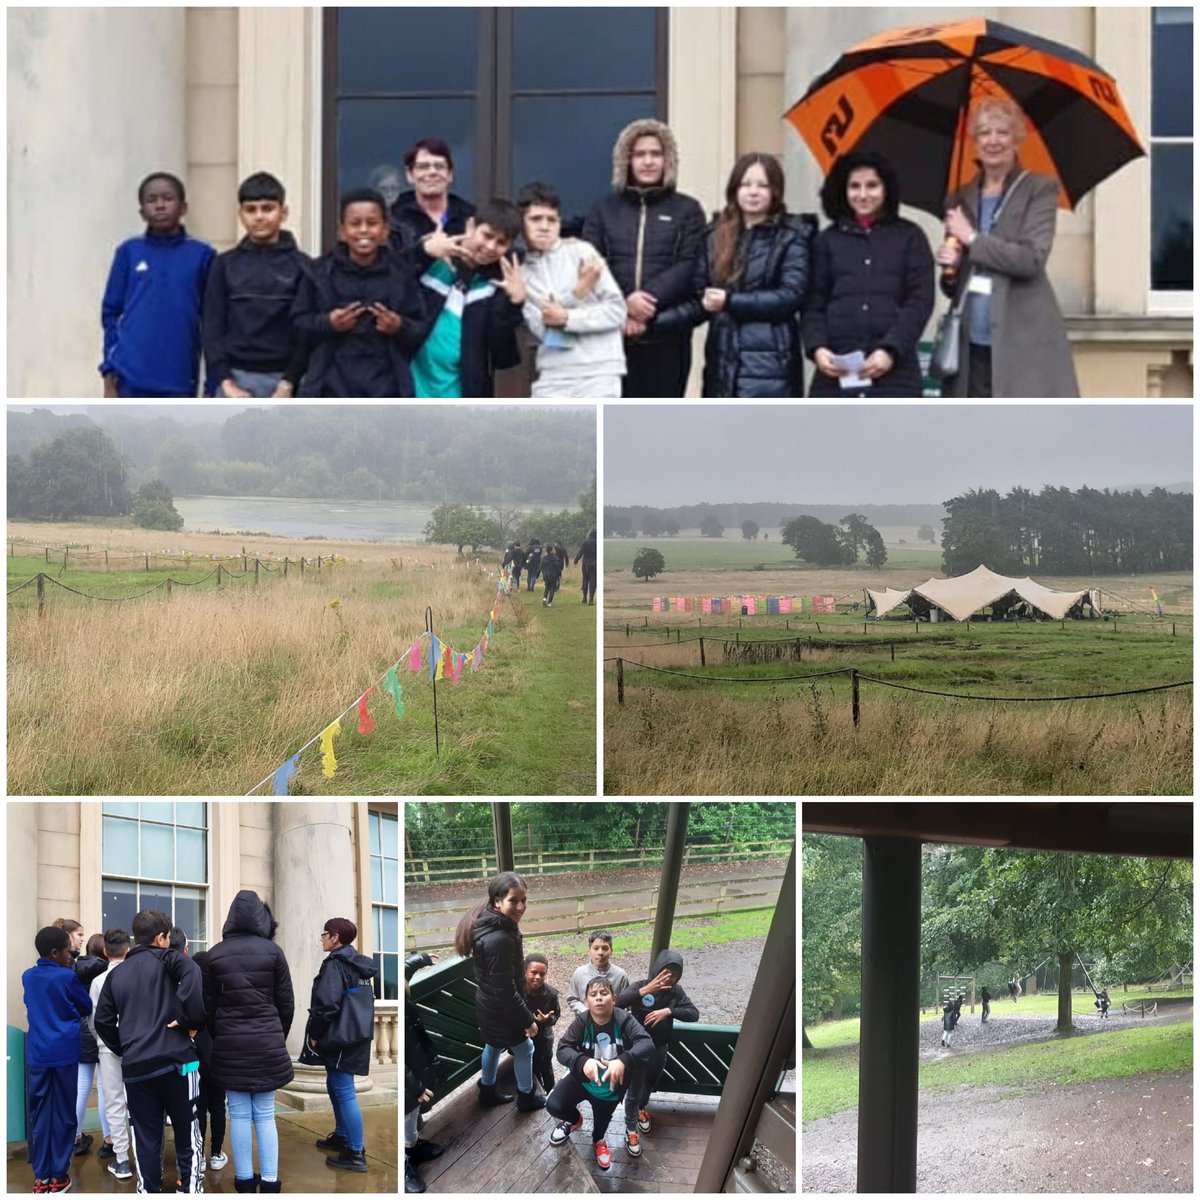 The rain couldn't dampen a fantastic day out at #HarewoodHouse for #Youngpeople from #Burmantofts & #RichmondHill yesterday 

Big #THANKYOU to ward cllrs for supporting with funding 

#Youthwork
#LeedsYouthService